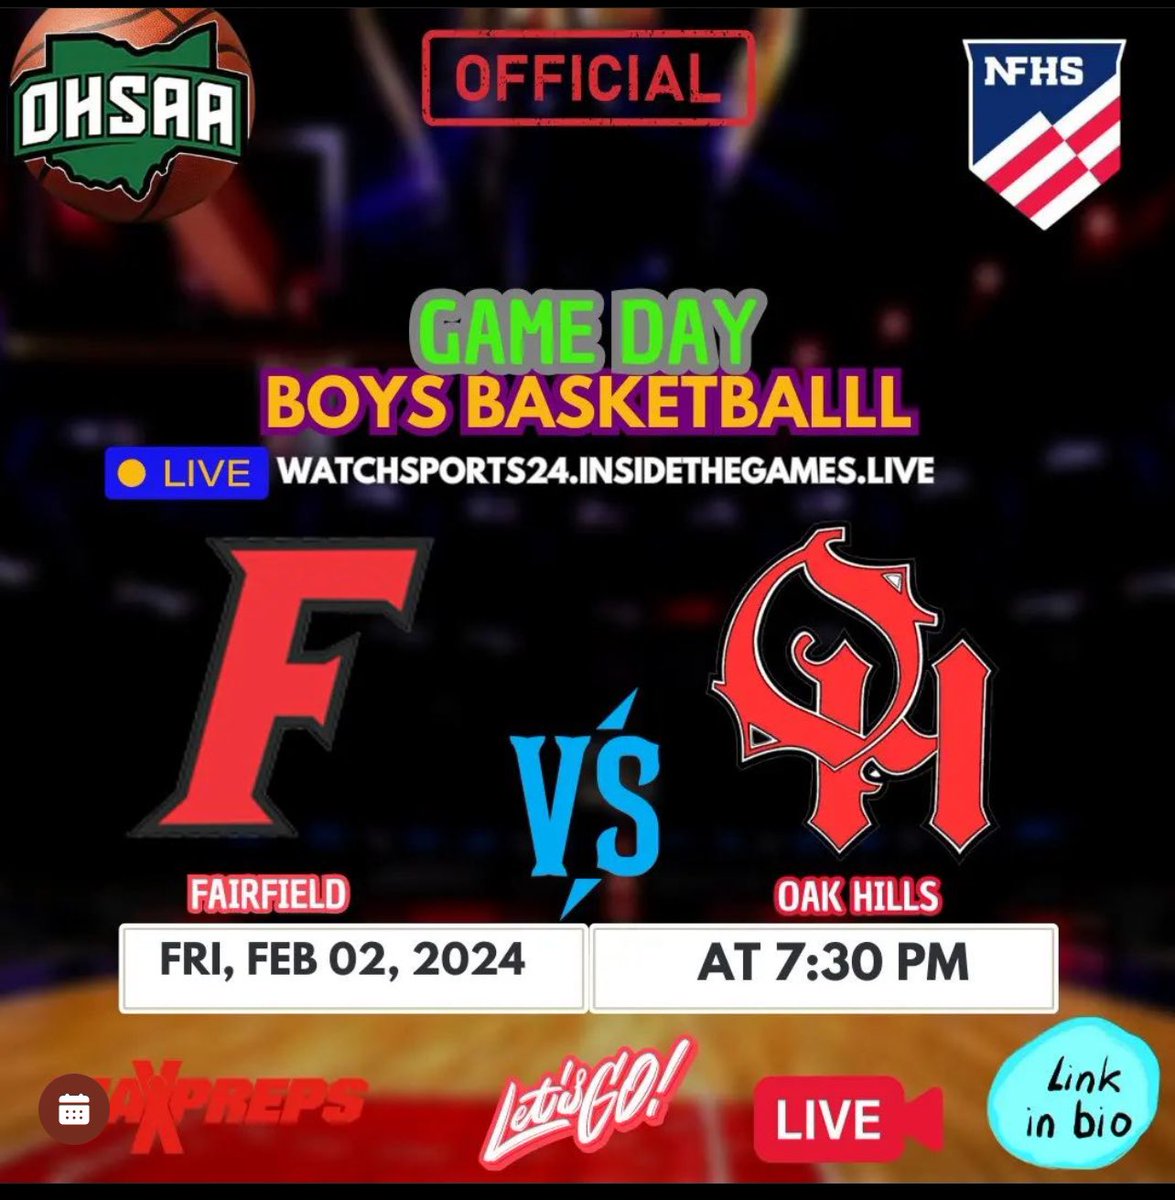 It’s almost GAMETIME!!! 7:30pm at Oak Hills! Meet us there TRIBE! #ALLIN @fcsdathletics @TheTribeFHS